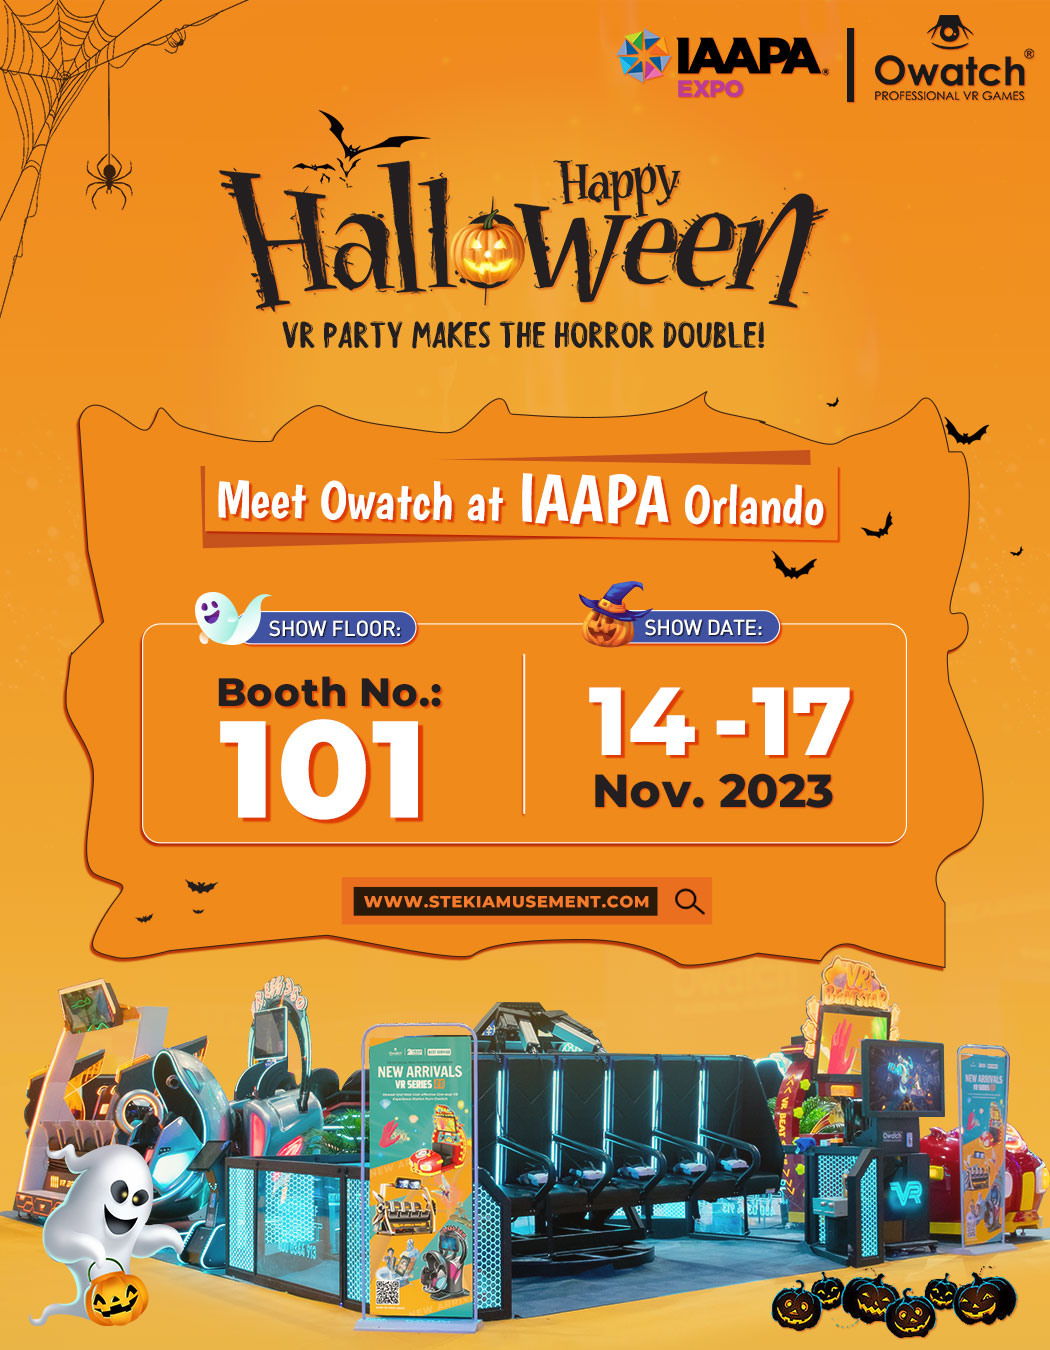 Happy Halloween and welcome to IAAPA and visit our show